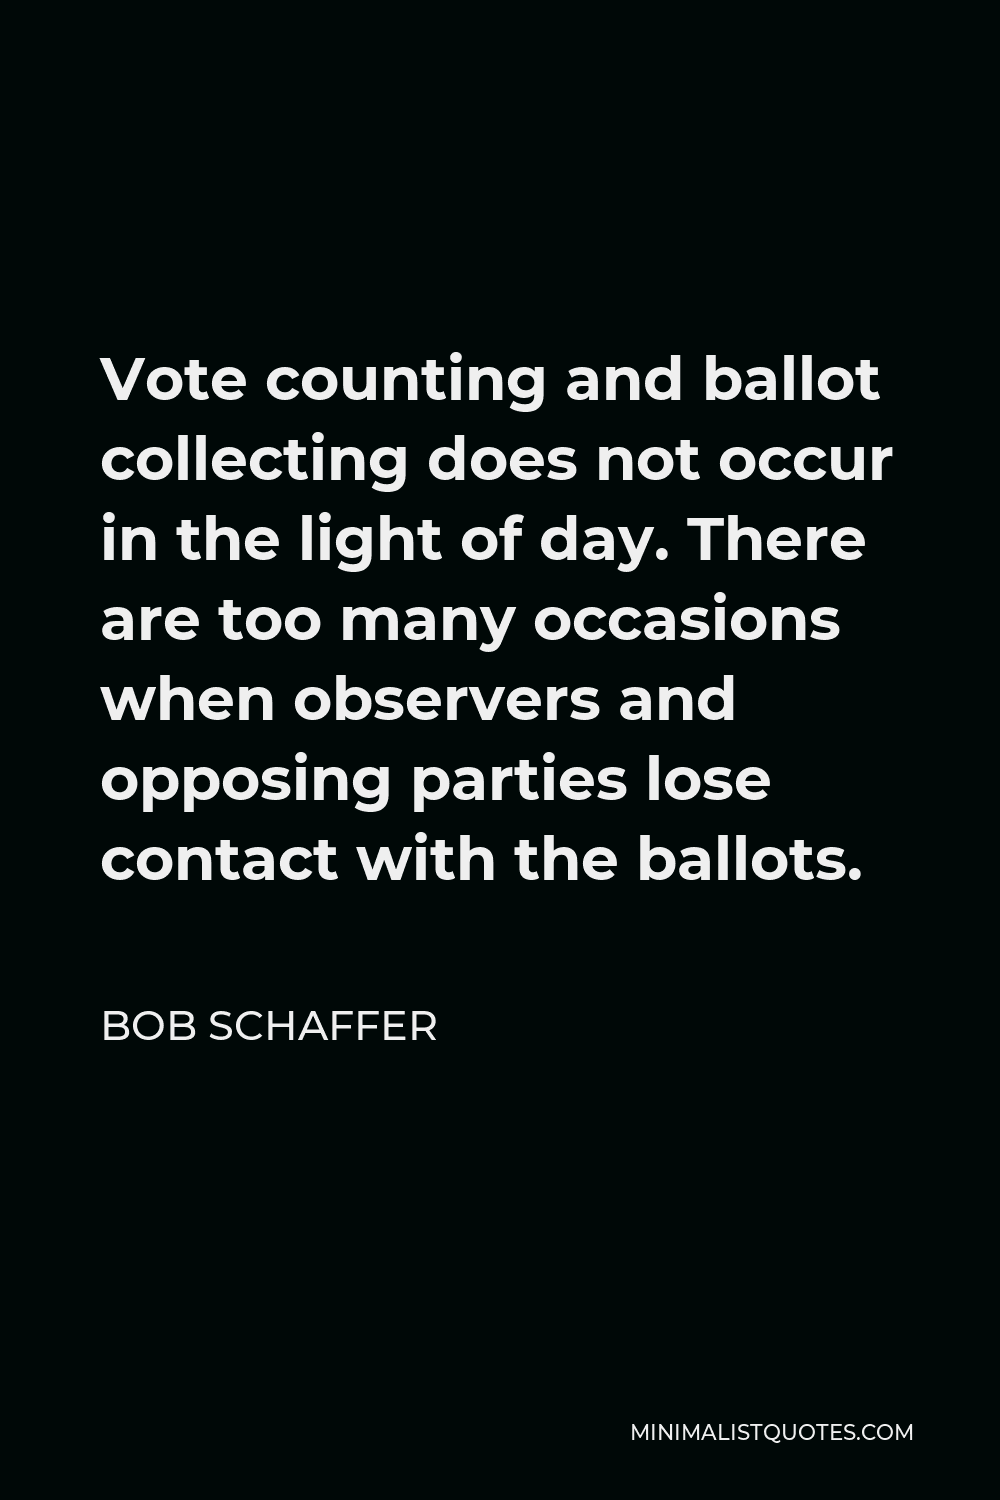 Bob Schaffer Quote - Vote counting and ballot collecting does not occur in the light of day. There are too many occasions when observers and opposing parties lose contact with the ballots.